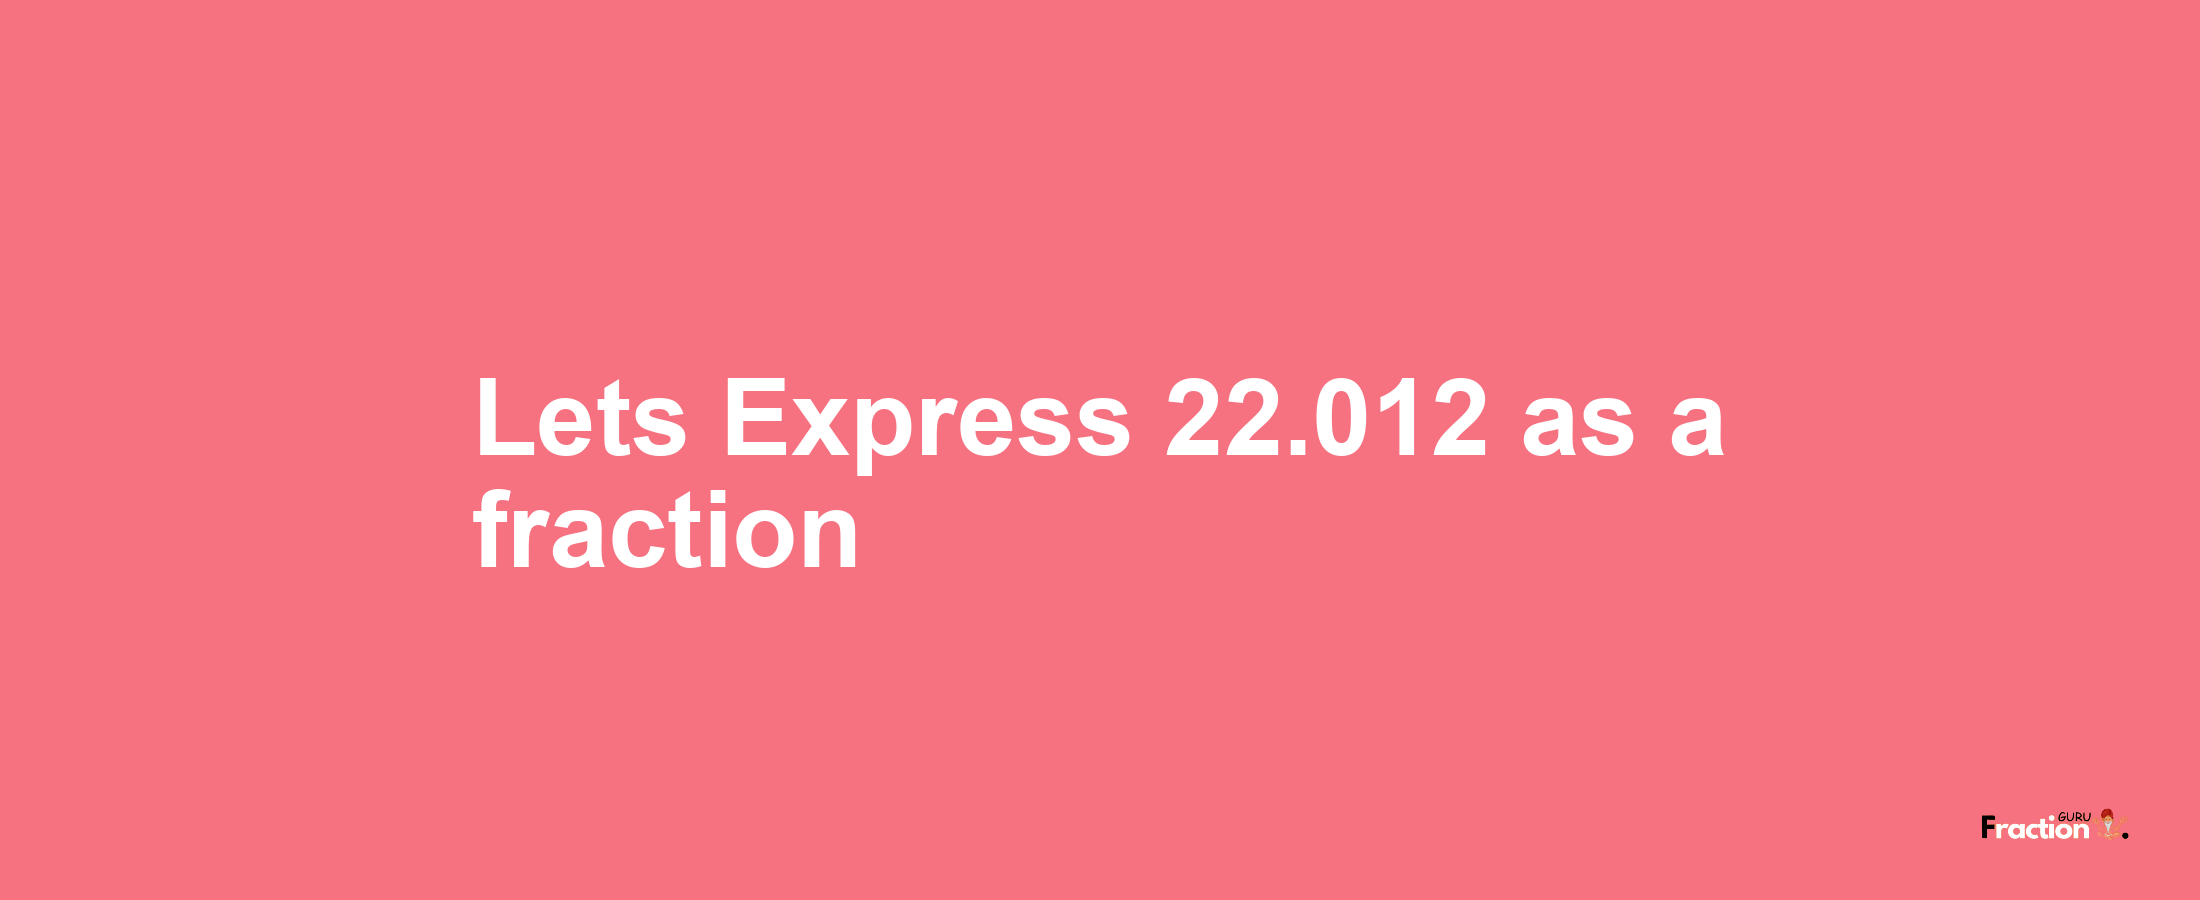 Lets Express 22.012 as afraction